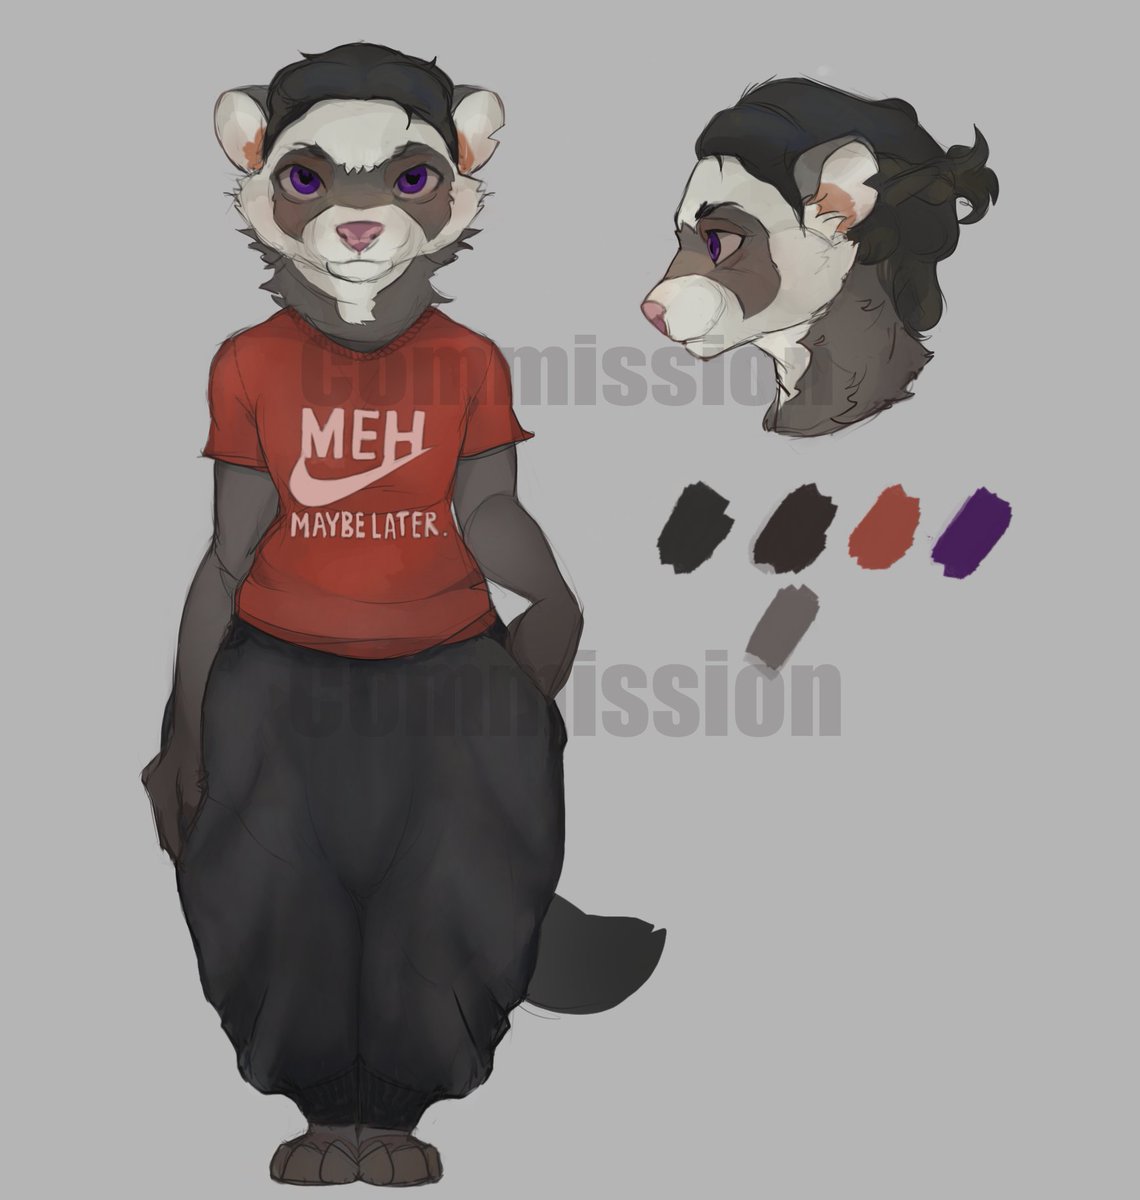 For @JTGrimsley <33 Thank you for the likes and reposts 🖤 #Furry #furryart #Fursona #Ferret